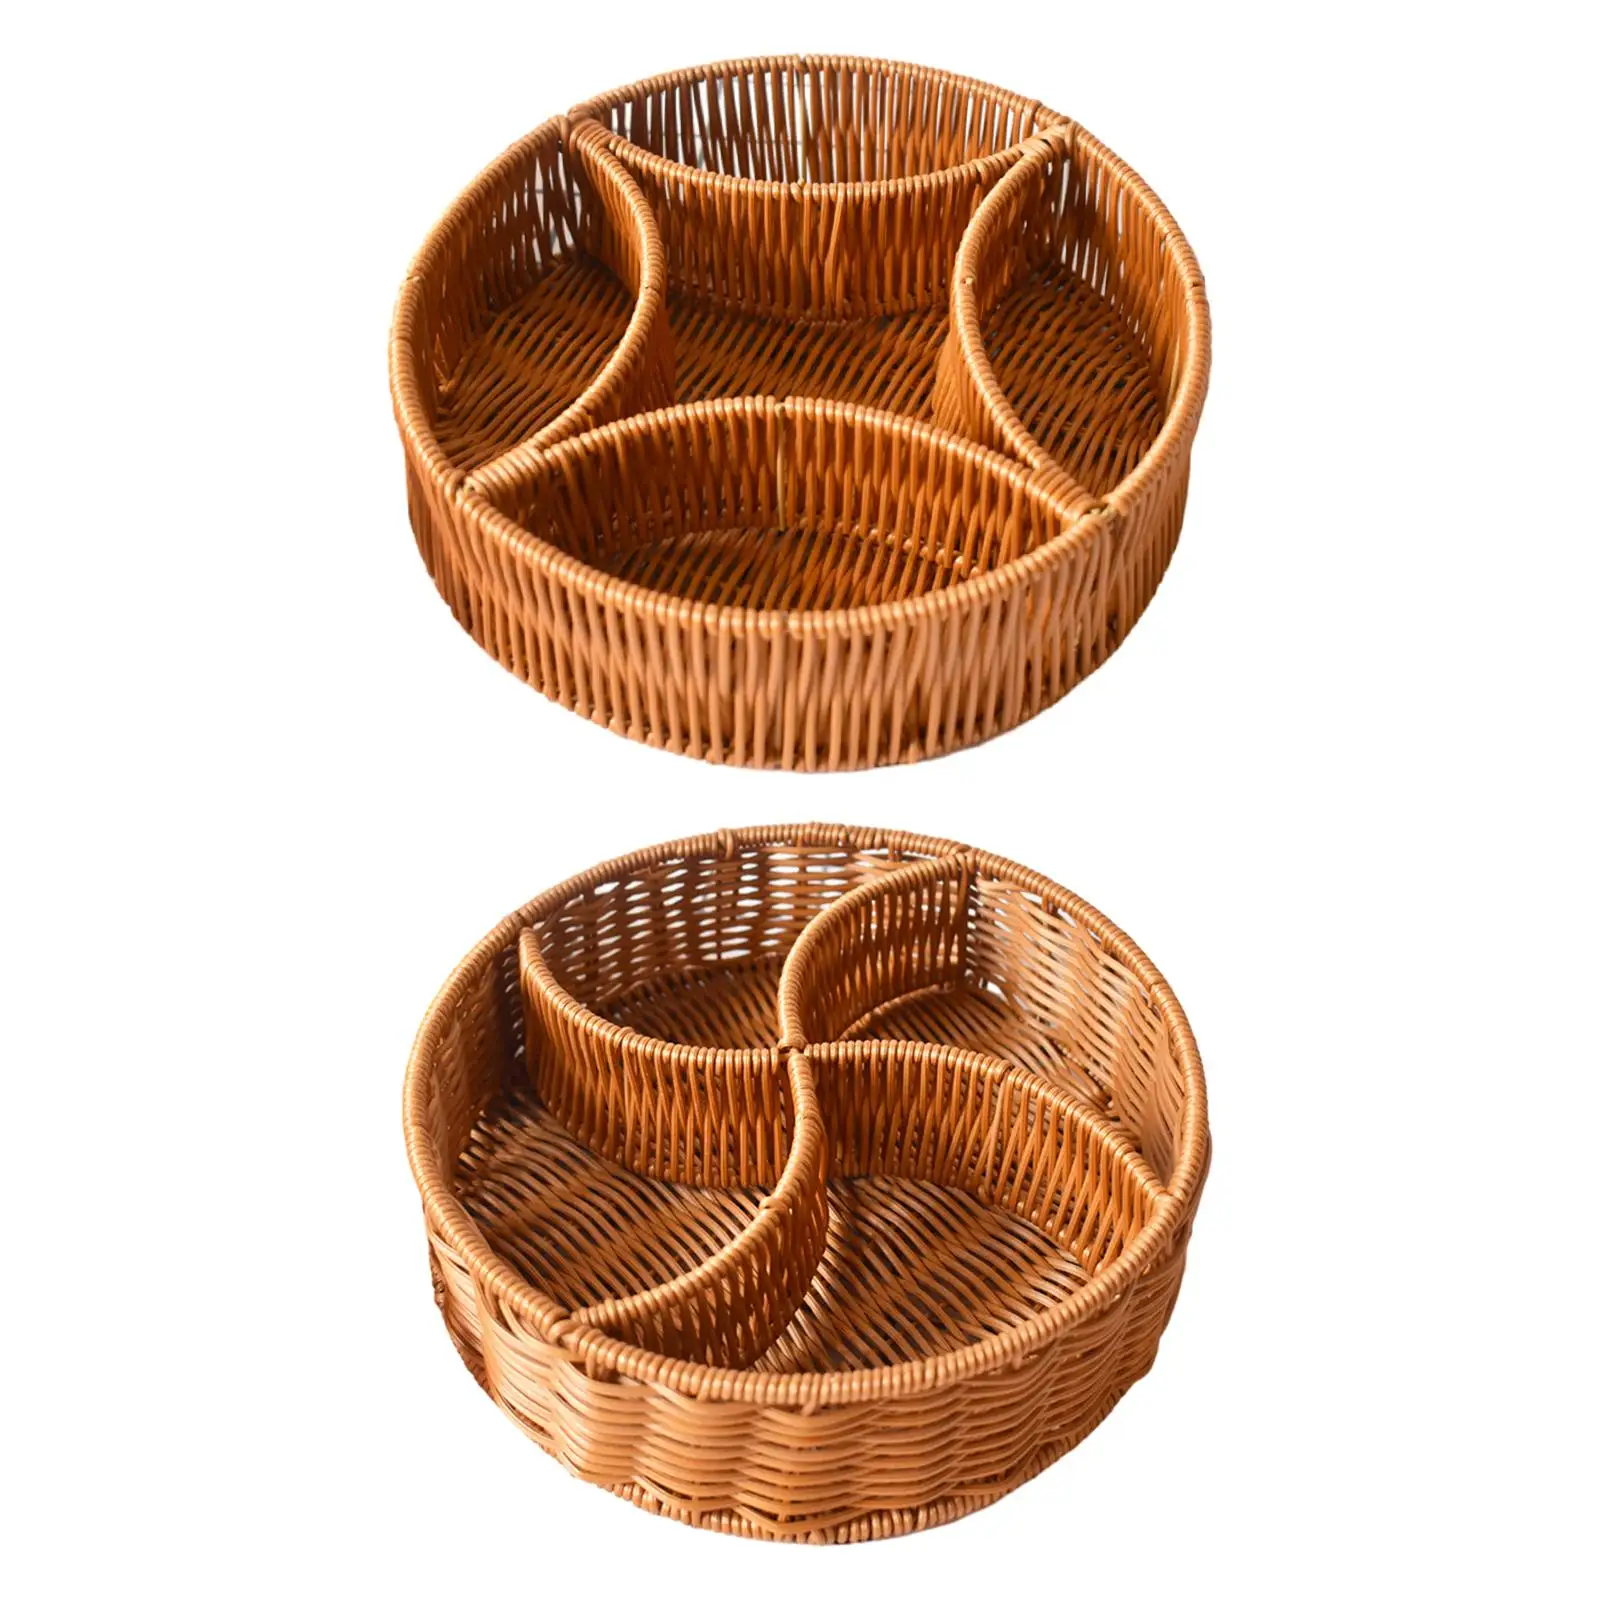 Hand Woven Serving Basket Candy Serving Tray Rustic Decorative Food Serving Holder for Pantry Restaurant Hotel Coffee Table Home